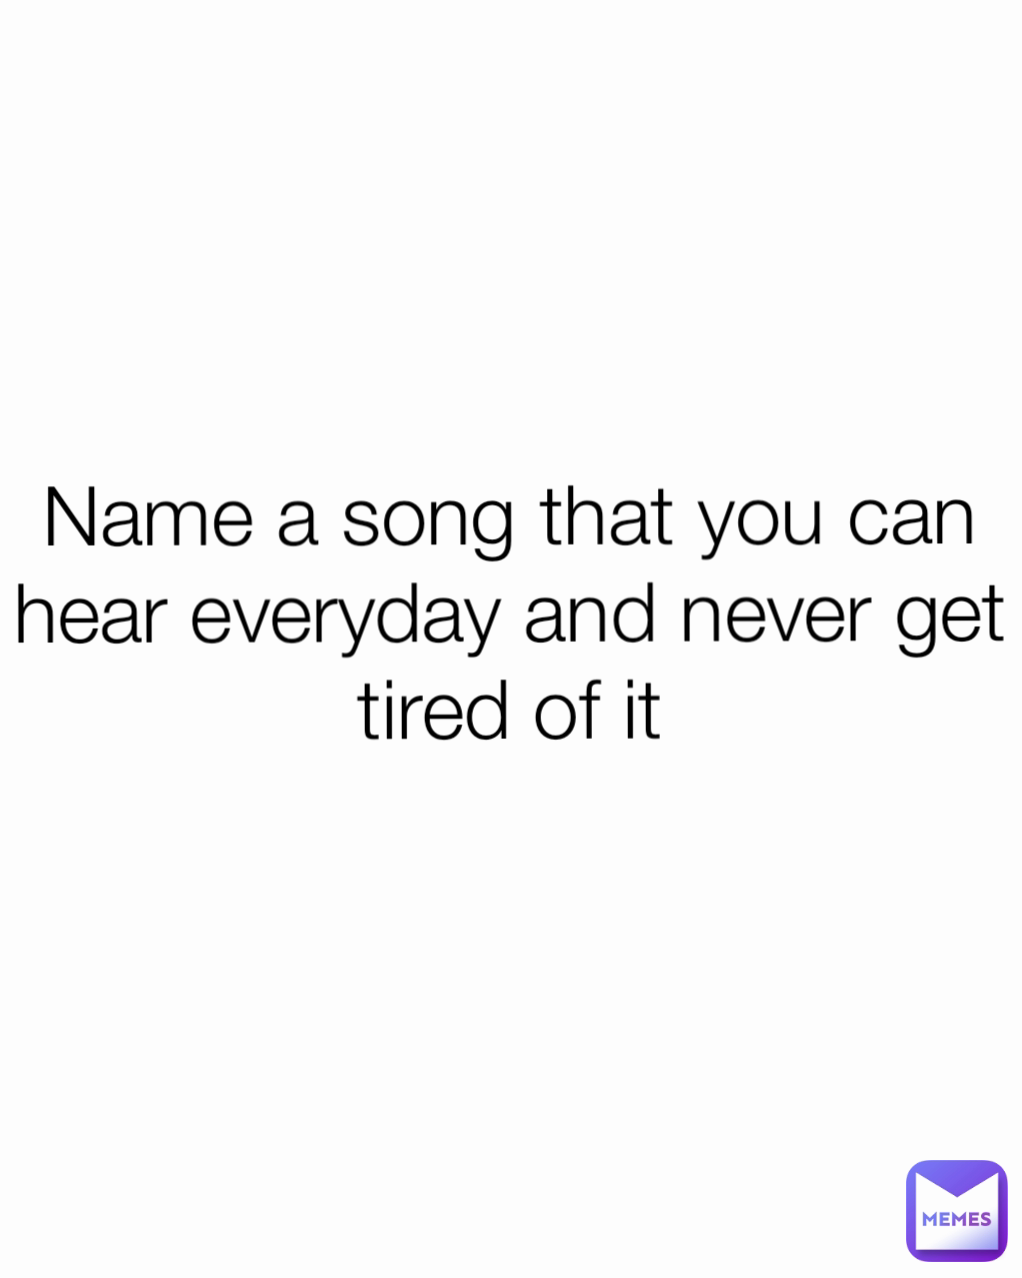 Name a song that you can hear everyday and never get tired of it